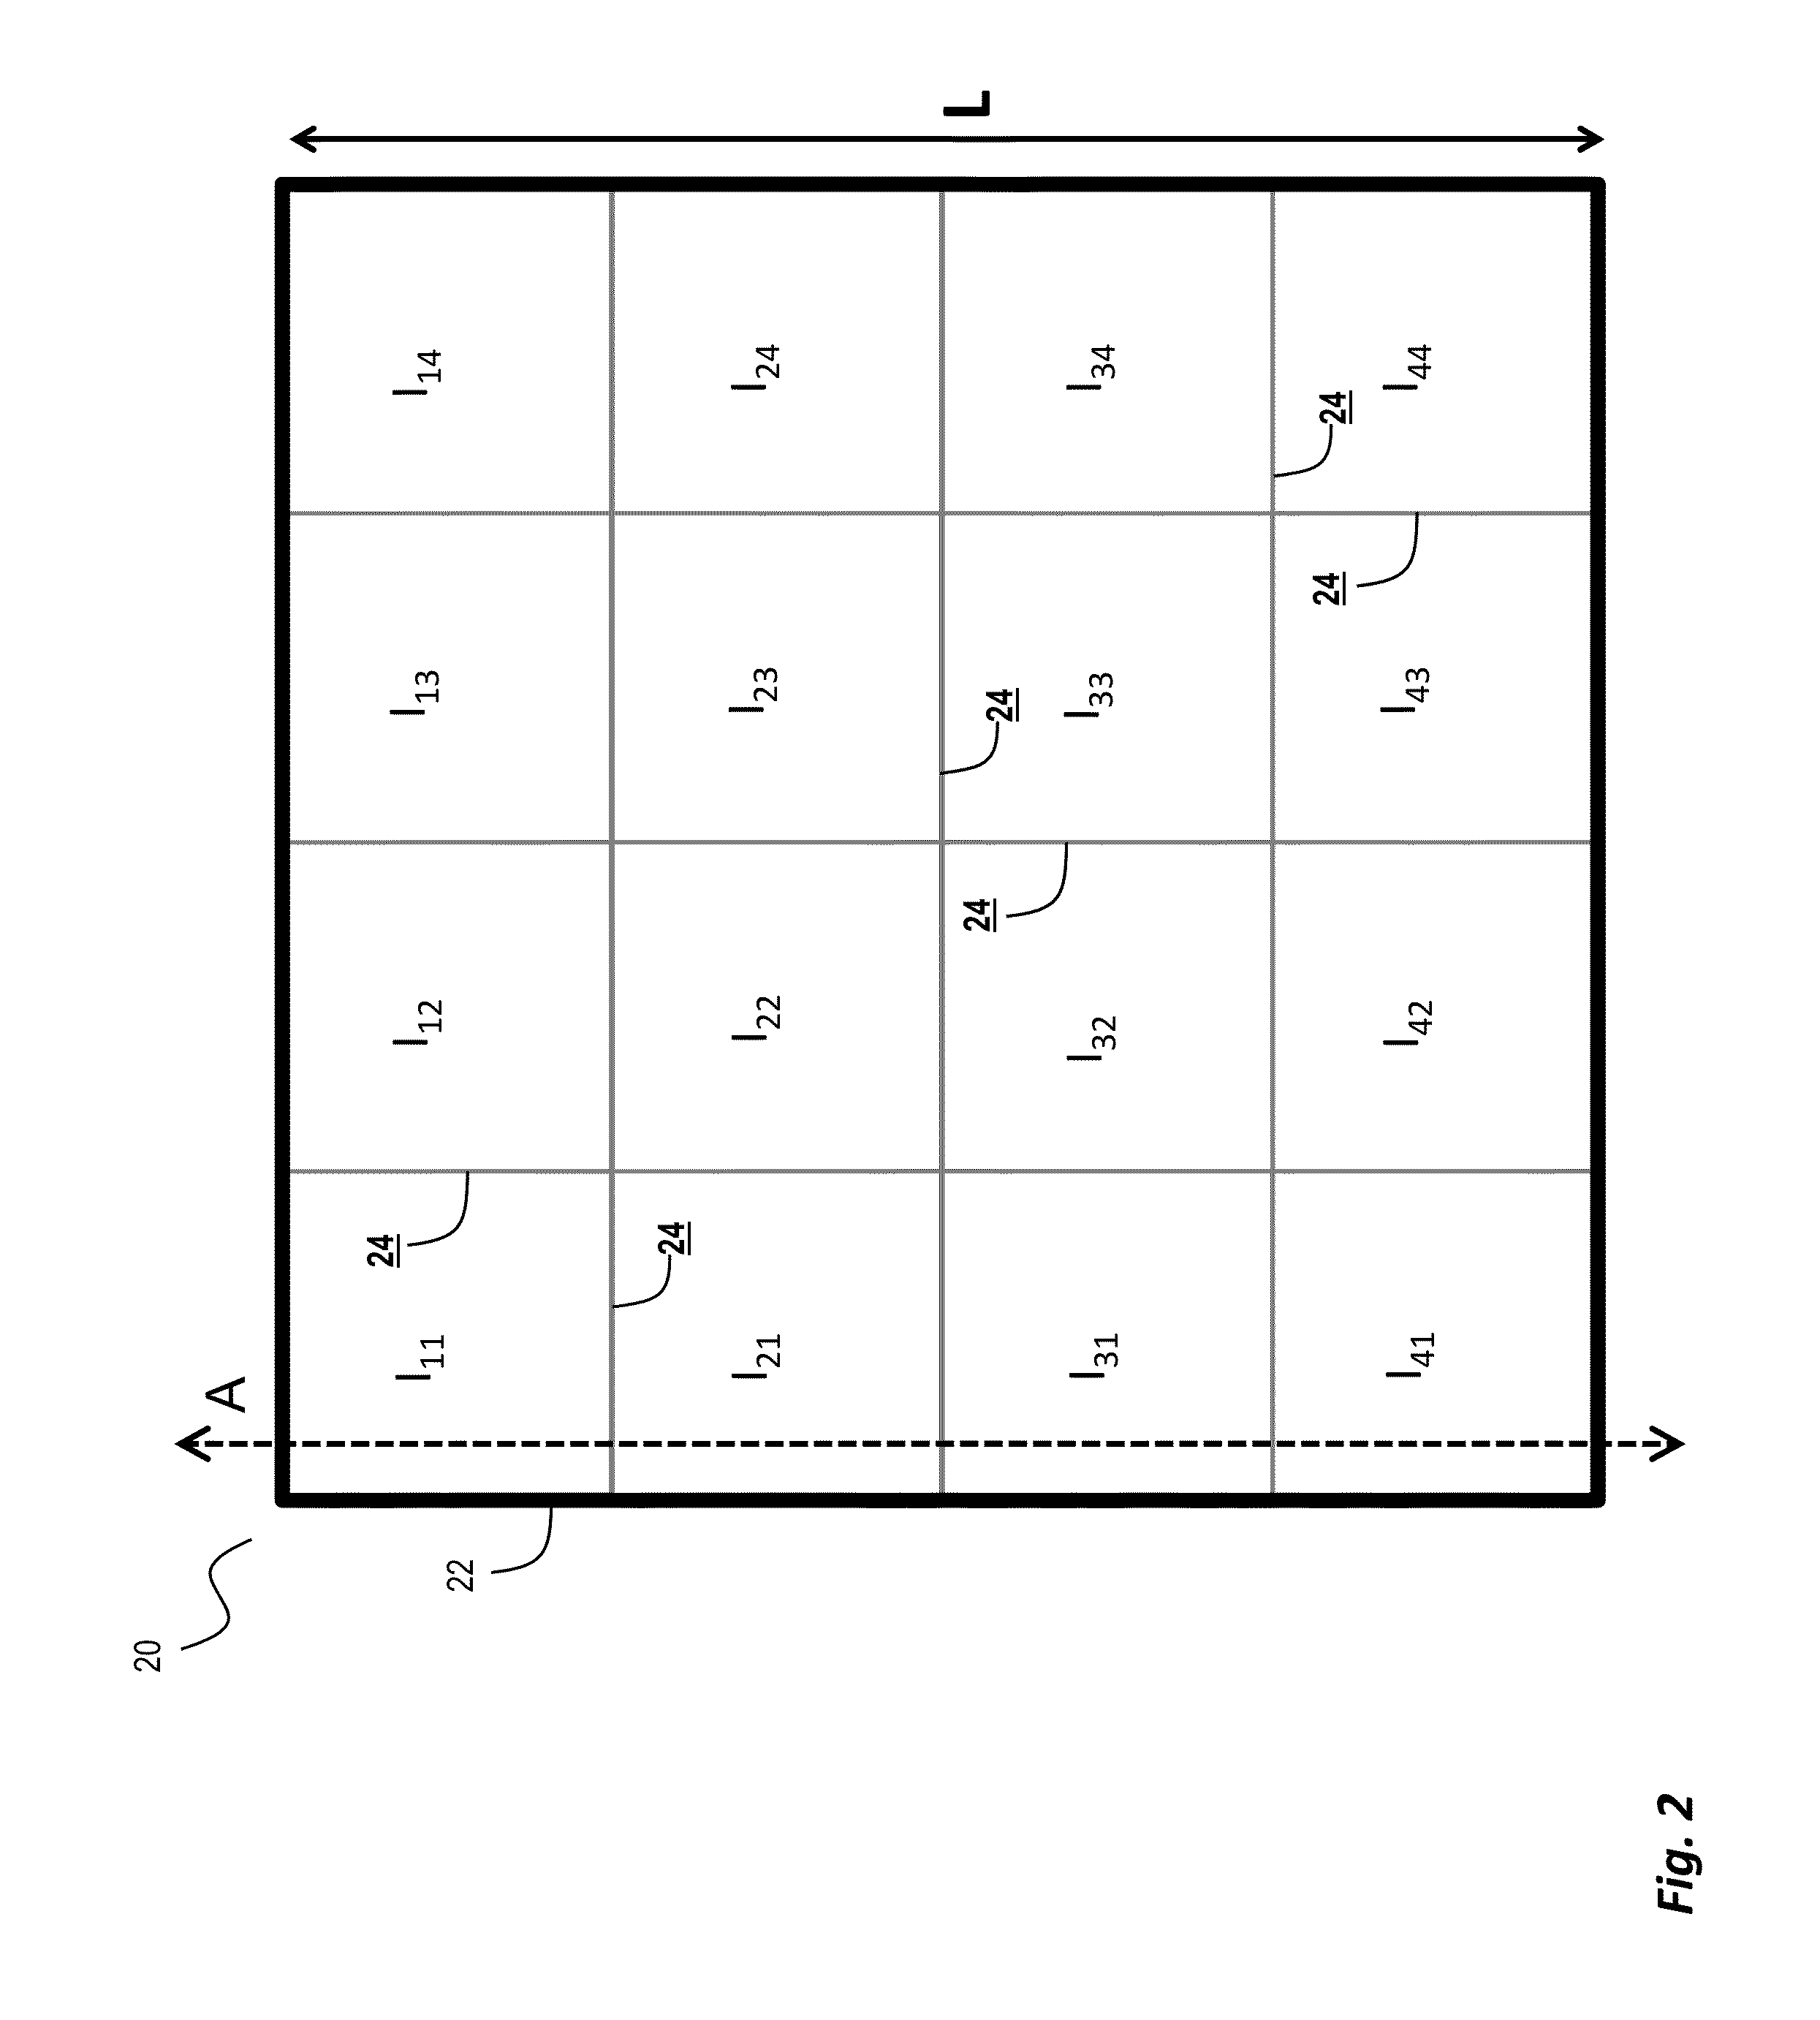 Systems and methods for monolithically isled solar photovoltaic cells and modules